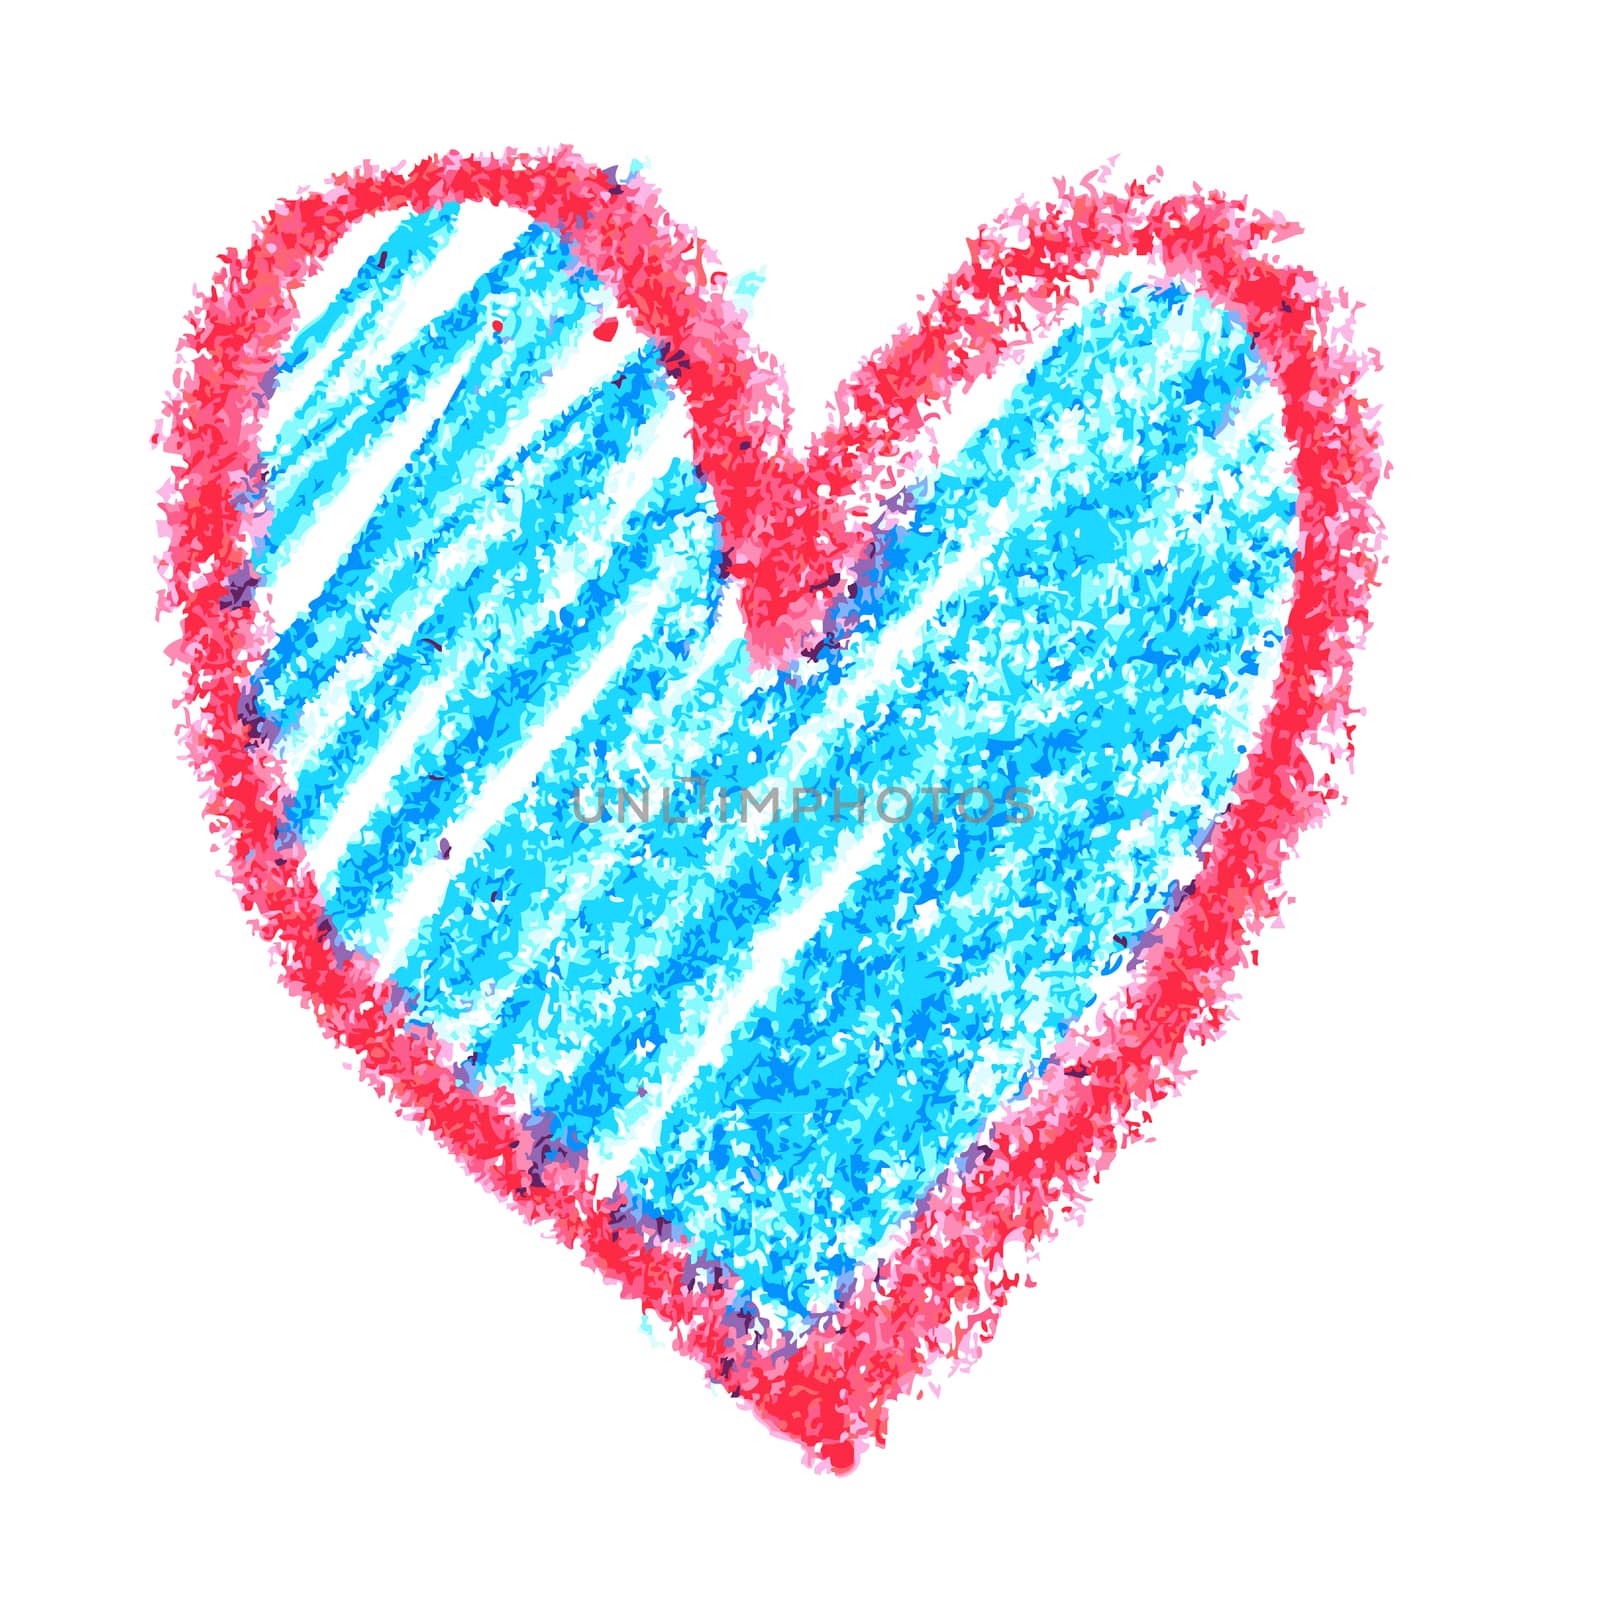 doodle abstract hand drawn pattern heart shaped on white background 